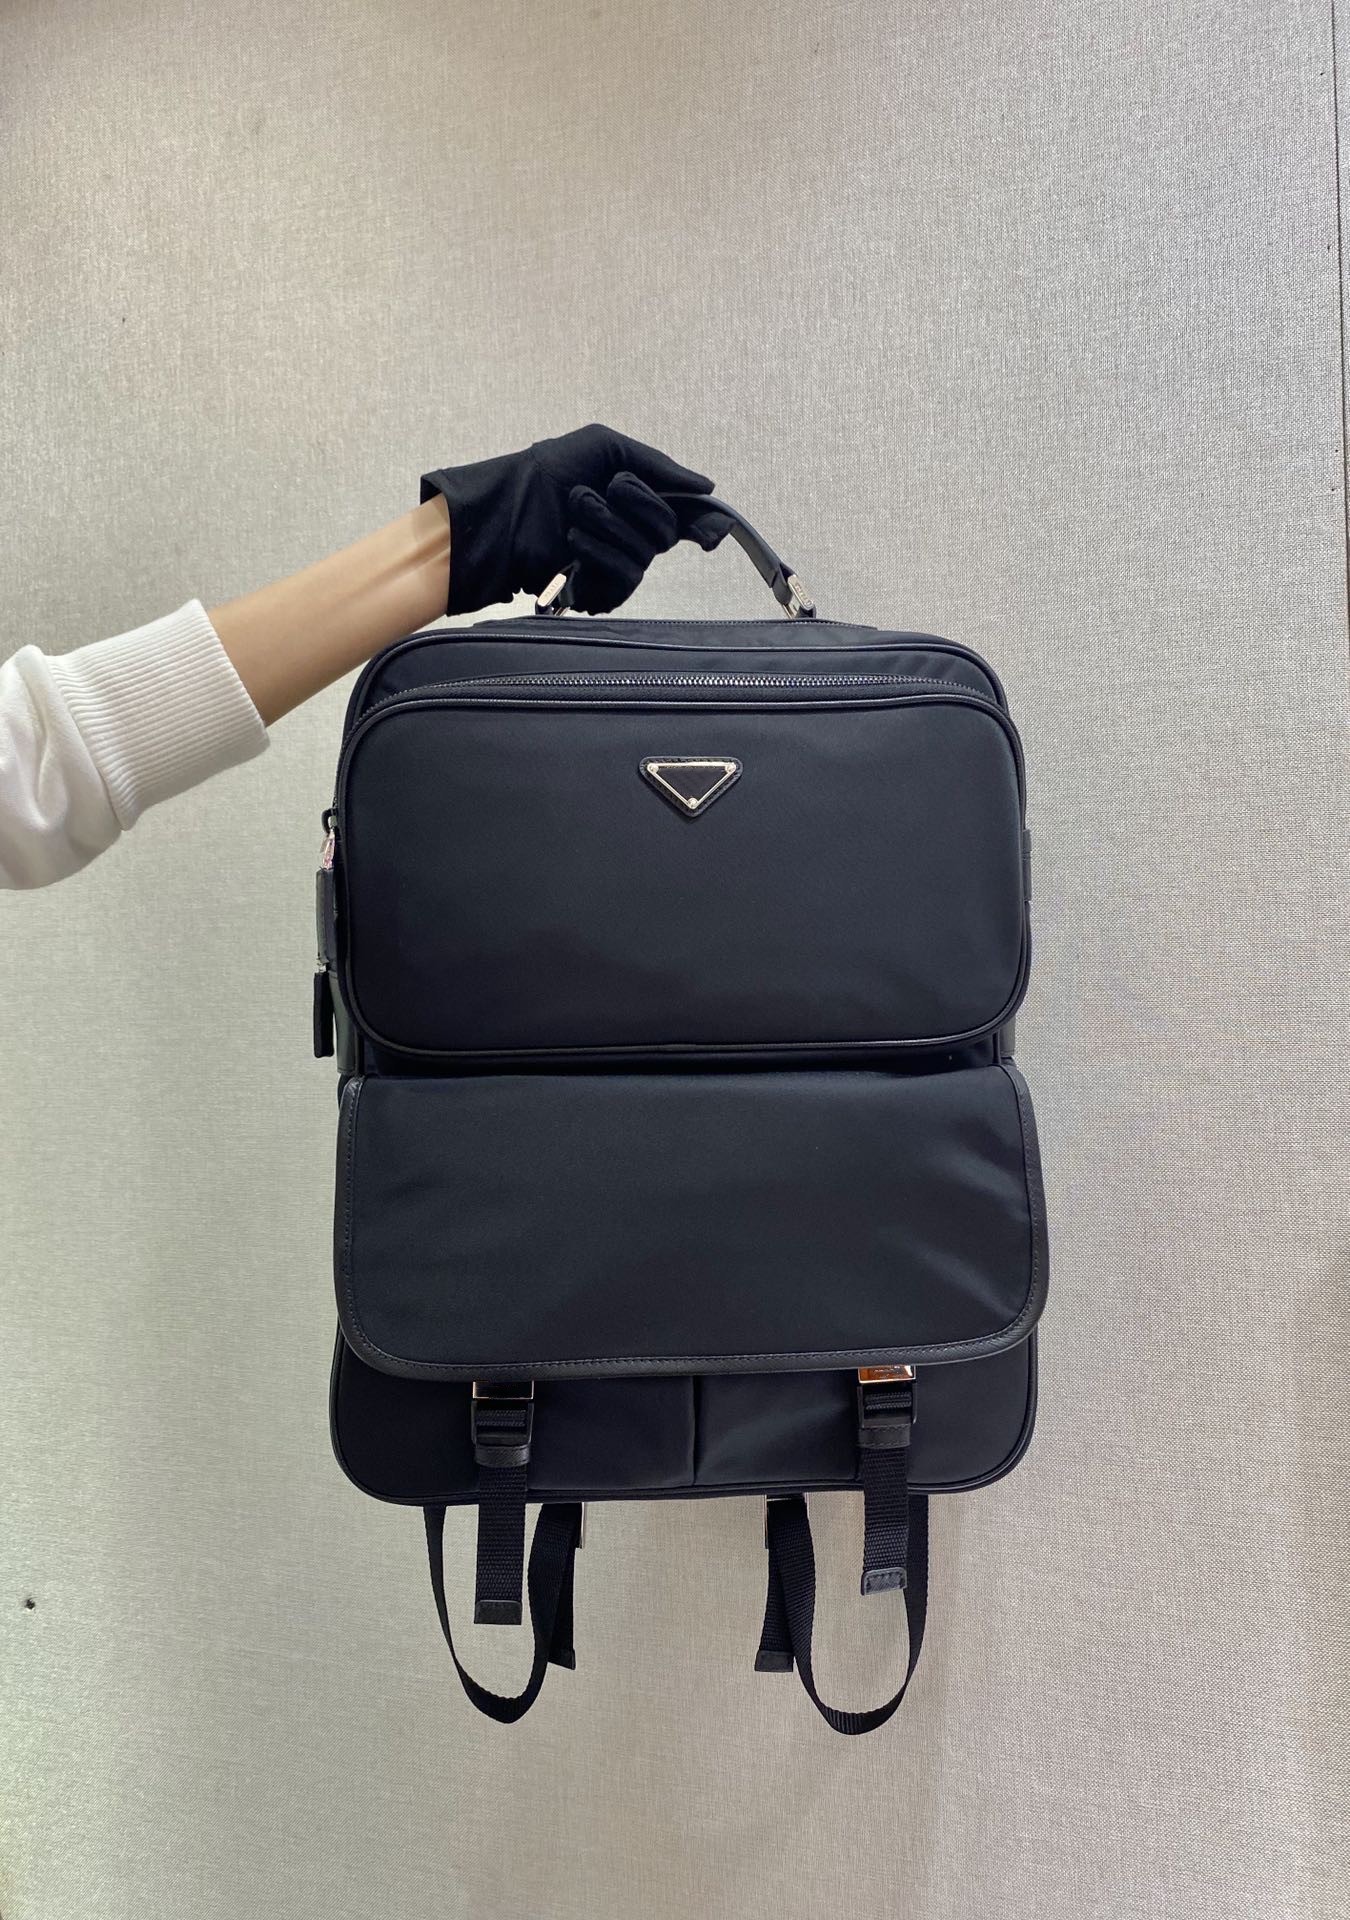 

2023 new men's and women's backpack high-end quality rear design can be inserted rod box on the grid layer function is very strong upper body effect is very cool 2VZ049, Black